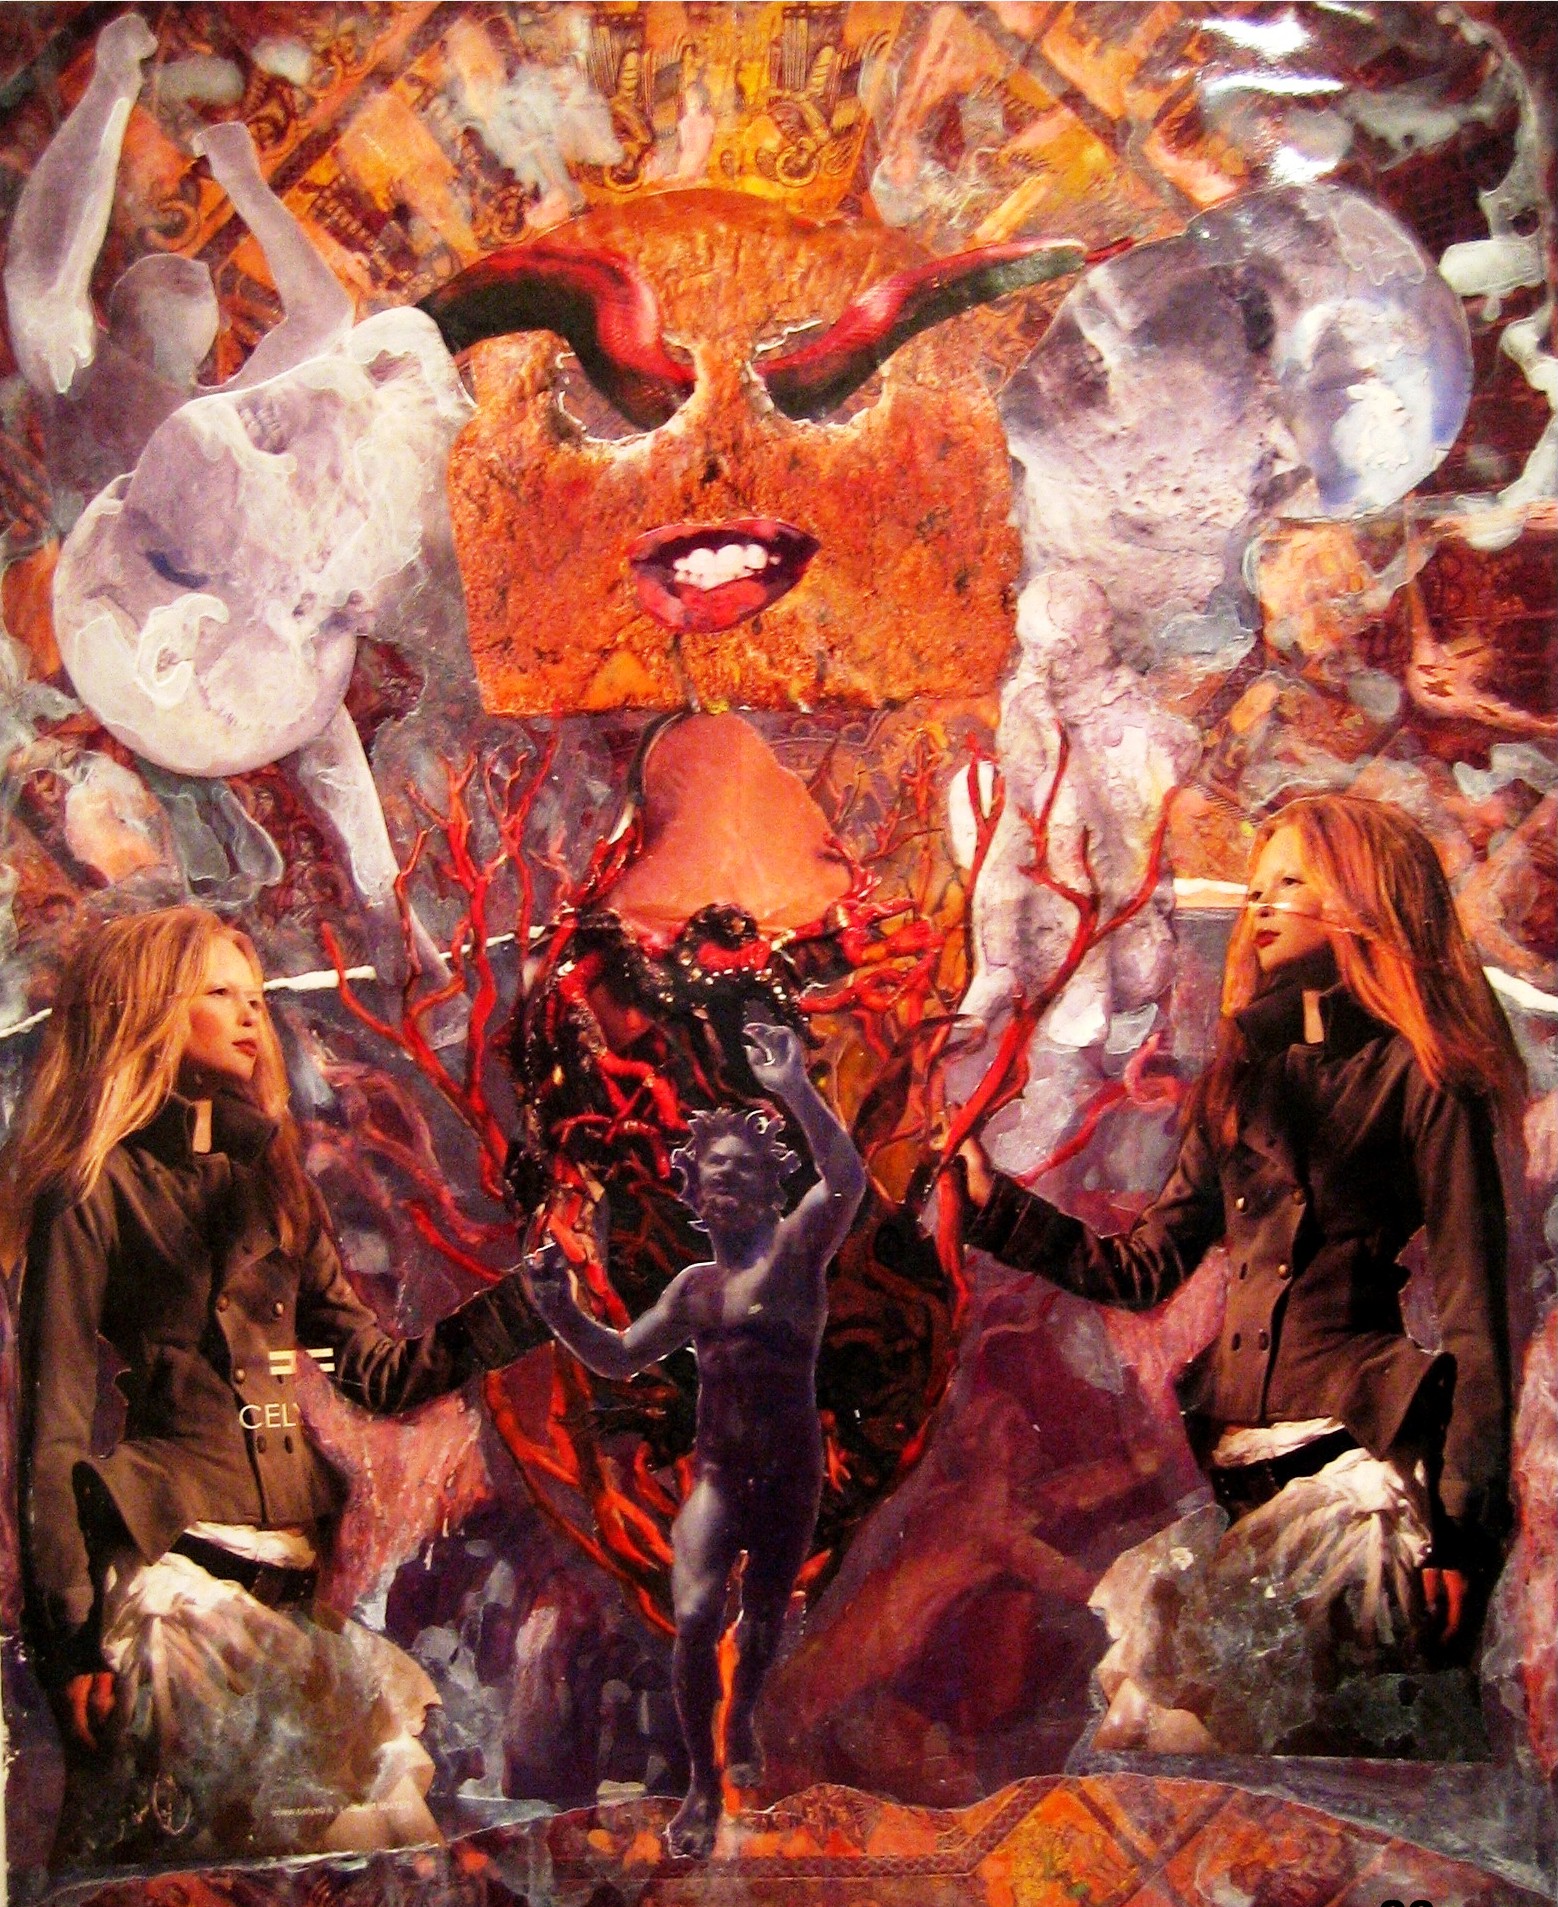 Hell-Photo Collage-20h x 16w in